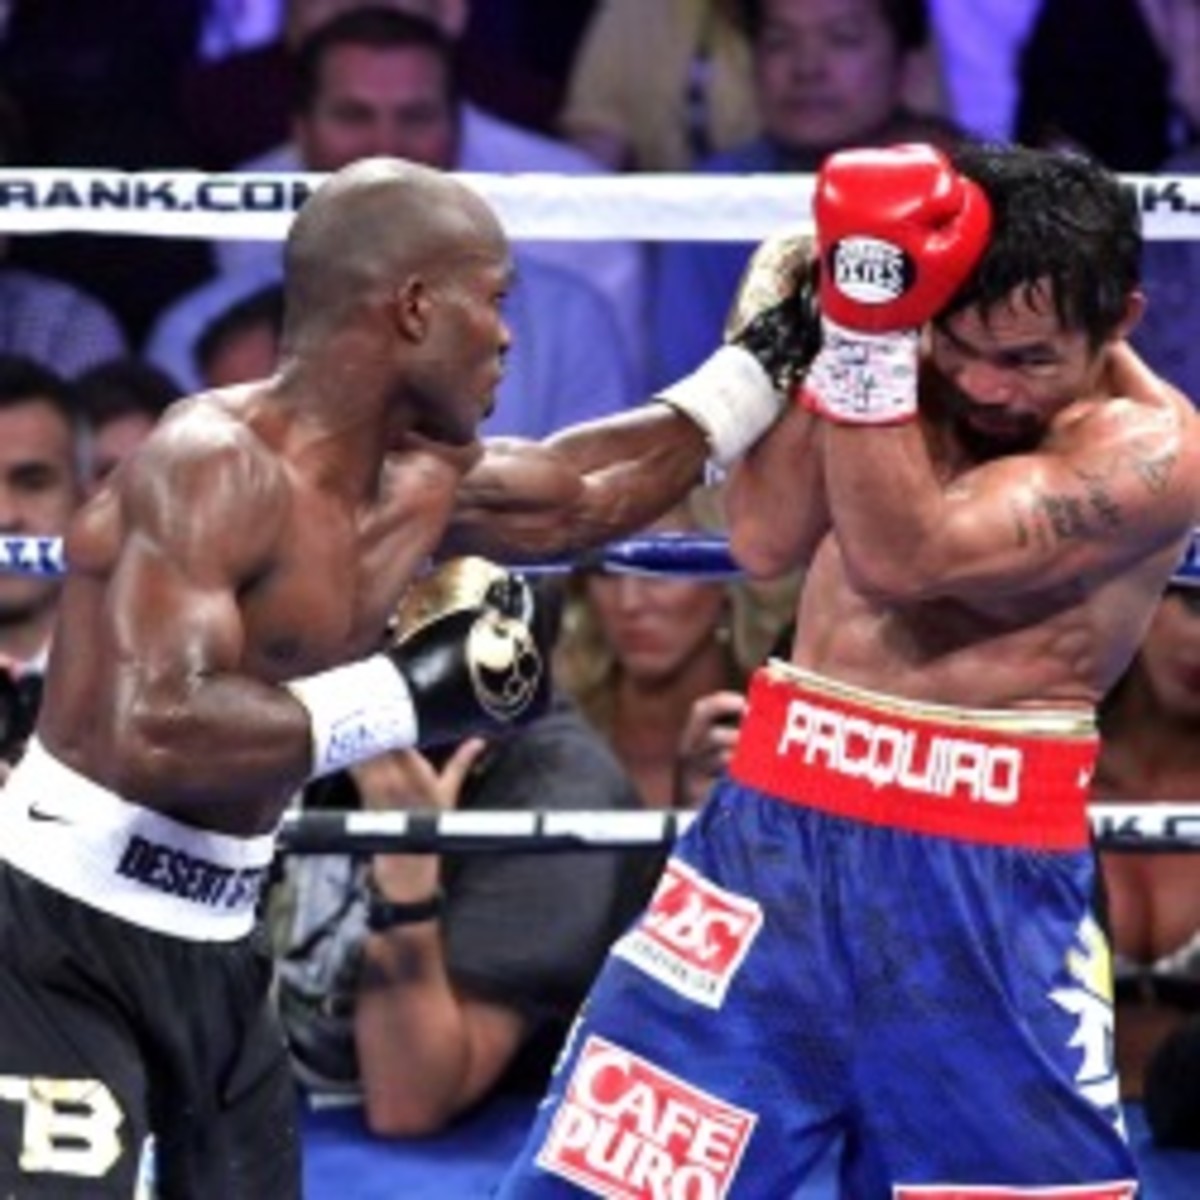 Timothy Bradley said he received death threats after beating Manny Pacquiao last year. (John Gurzinski /Getty Images)